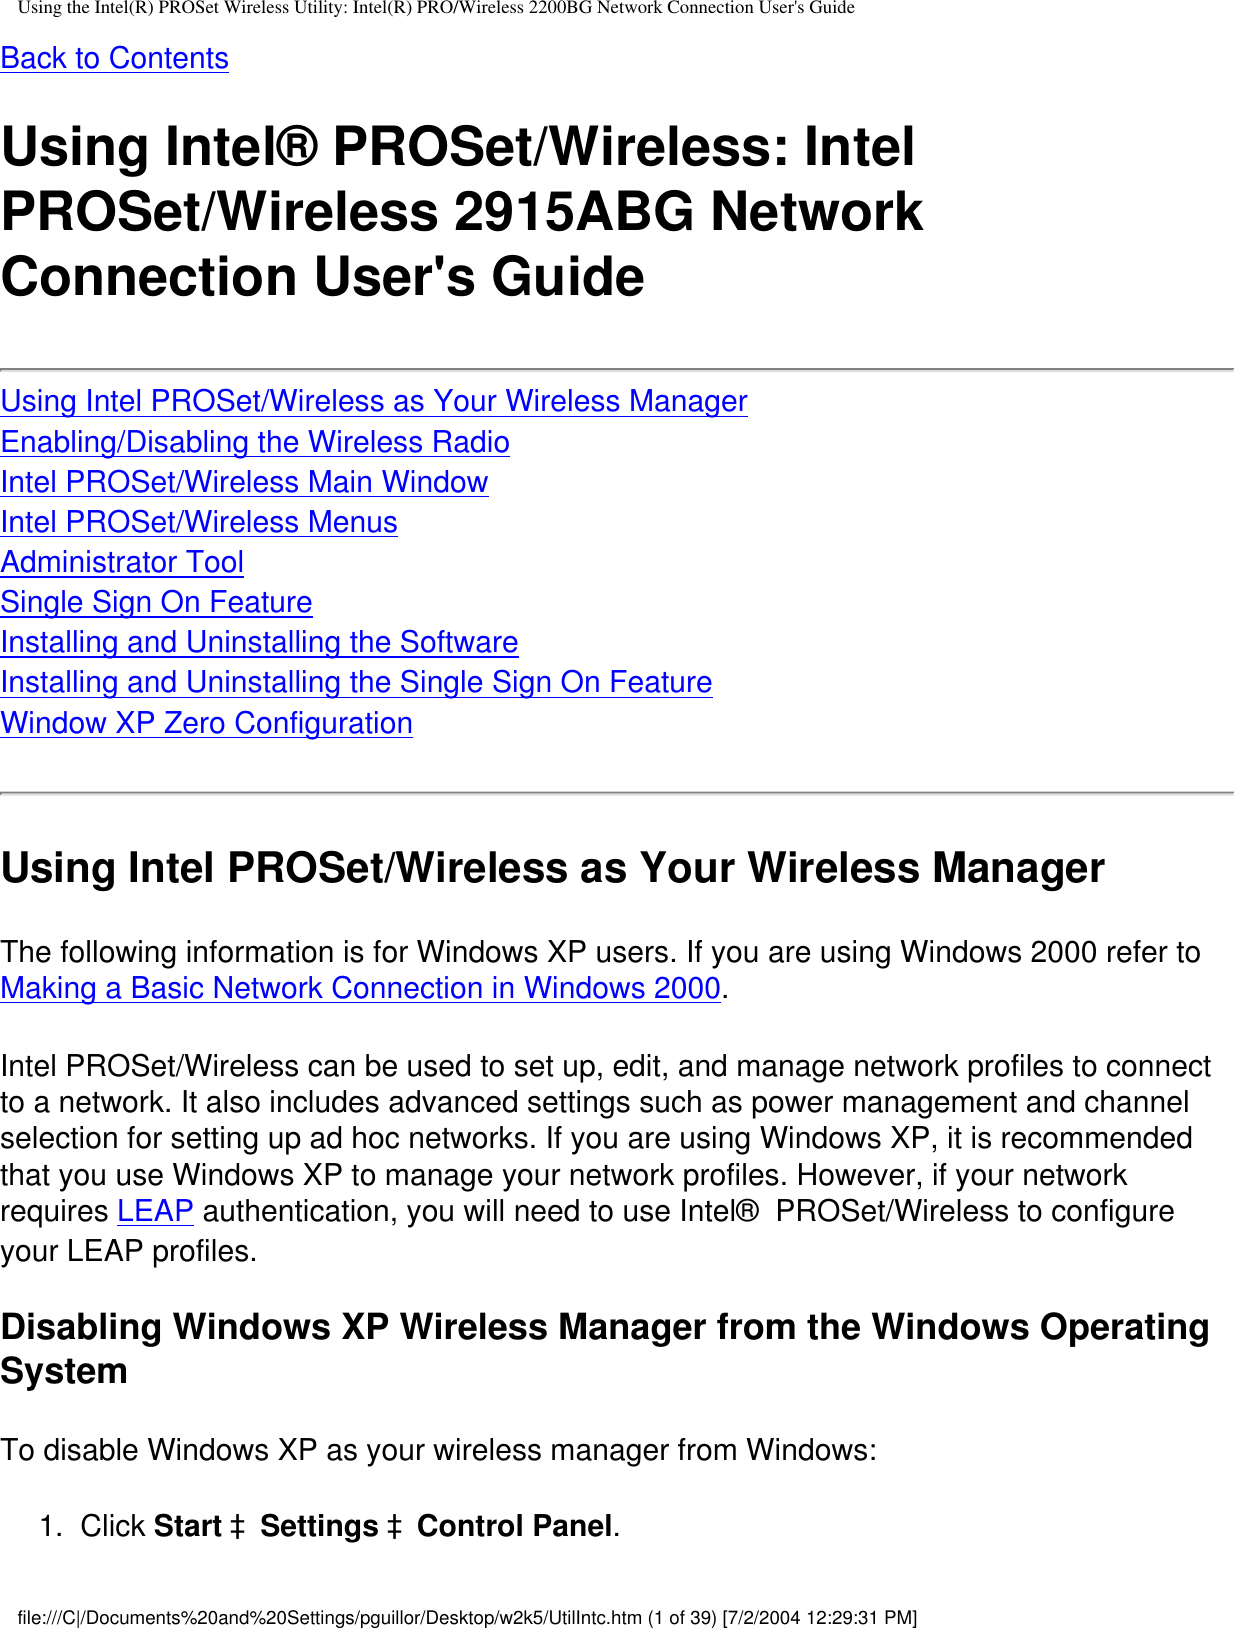 Using the Intel(R) PROSet Wireless Utility: Intel(R) PRO/Wireless 2200BG Network Connection User&apos;s GuideBack to ContentsUsing Intel® PROSet/Wireless: Intel PROSet/Wireless 2915ABG Network Connection User&apos;s GuideUsing Intel PROSet/Wireless as Your Wireless ManagerEnabling/Disabling the Wireless RadioIntel PROSet/Wireless Main WindowIntel PROSet/Wireless MenusAdministrator ToolSingle Sign On FeatureInstalling and Uninstalling the SoftwareInstalling and Uninstalling the Single Sign On FeatureWindow XP Zero ConfigurationUsing Intel PROSet/Wireless as Your Wireless ManagerThe following information is for Windows XP users. If you are using Windows 2000 refer to Making a Basic Network Connection in Windows 2000.Intel PROSet/Wireless can be used to set up, edit, and manage network profiles to connect to a network. It also includes advanced settings such as power management and channel selection for setting up ad hoc networks. If you are using Windows XP, it is recommended that you use Windows XP to manage your network profiles. However, if your network requires LEAP authentication, you will need to use Intel®  PROSet/Wireless to configure your LEAP profiles.Disabling Windows XP Wireless Manager from the Windows Operating SystemTo disable Windows XP as your wireless manager from Windows:1.  Click Start àSettings àControl Panel. file:///C|/Documents%20and%20Settings/pguillor/Desktop/w2k5/UtilIntc.htm (1 of 39) [7/2/2004 12:29:31 PM]